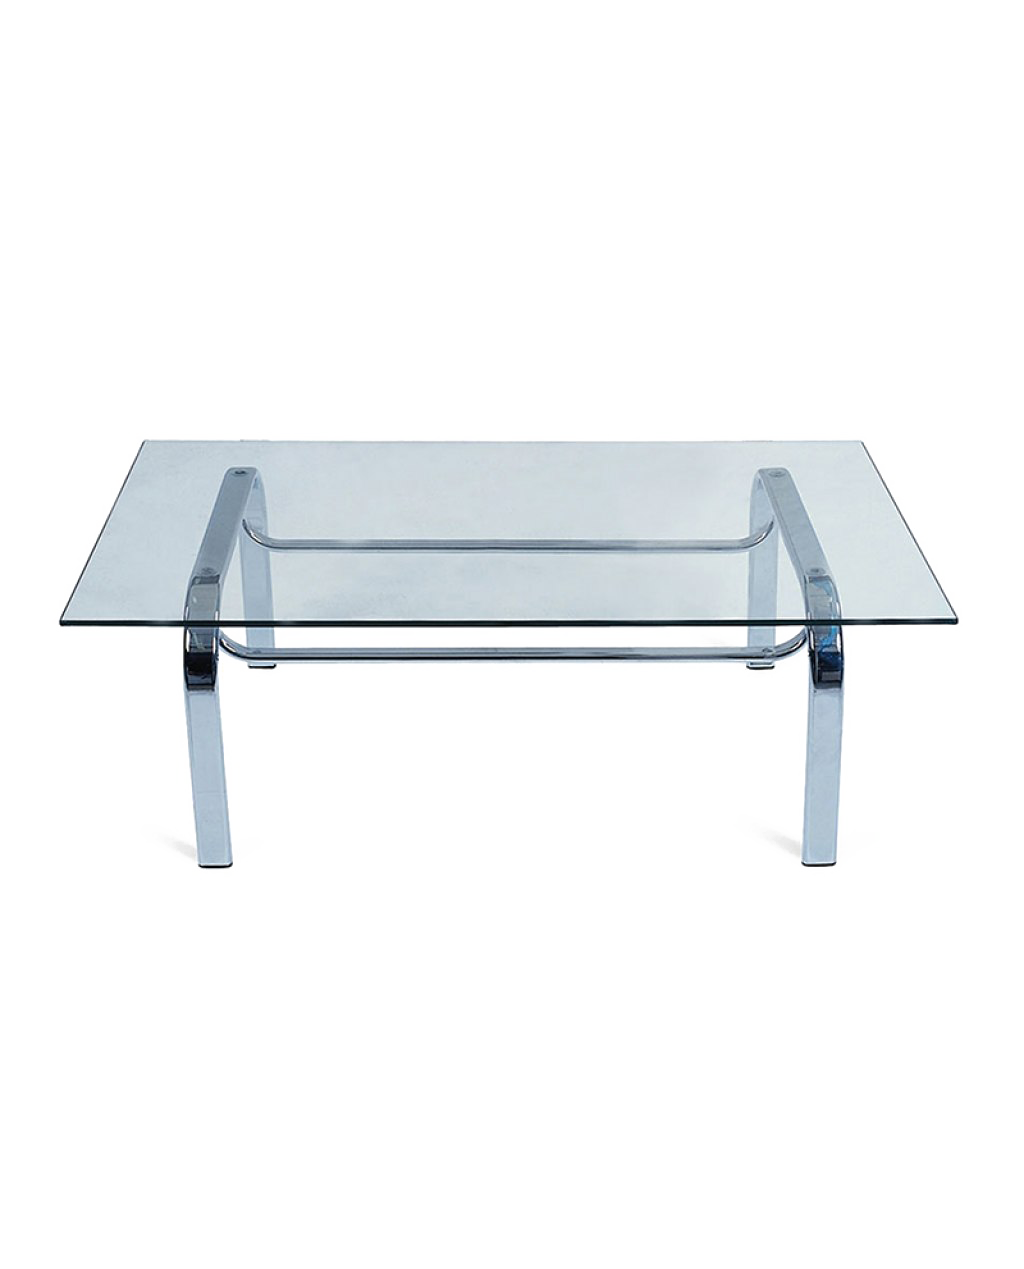 Glass Furniture PNG Image High Quality PNG Image